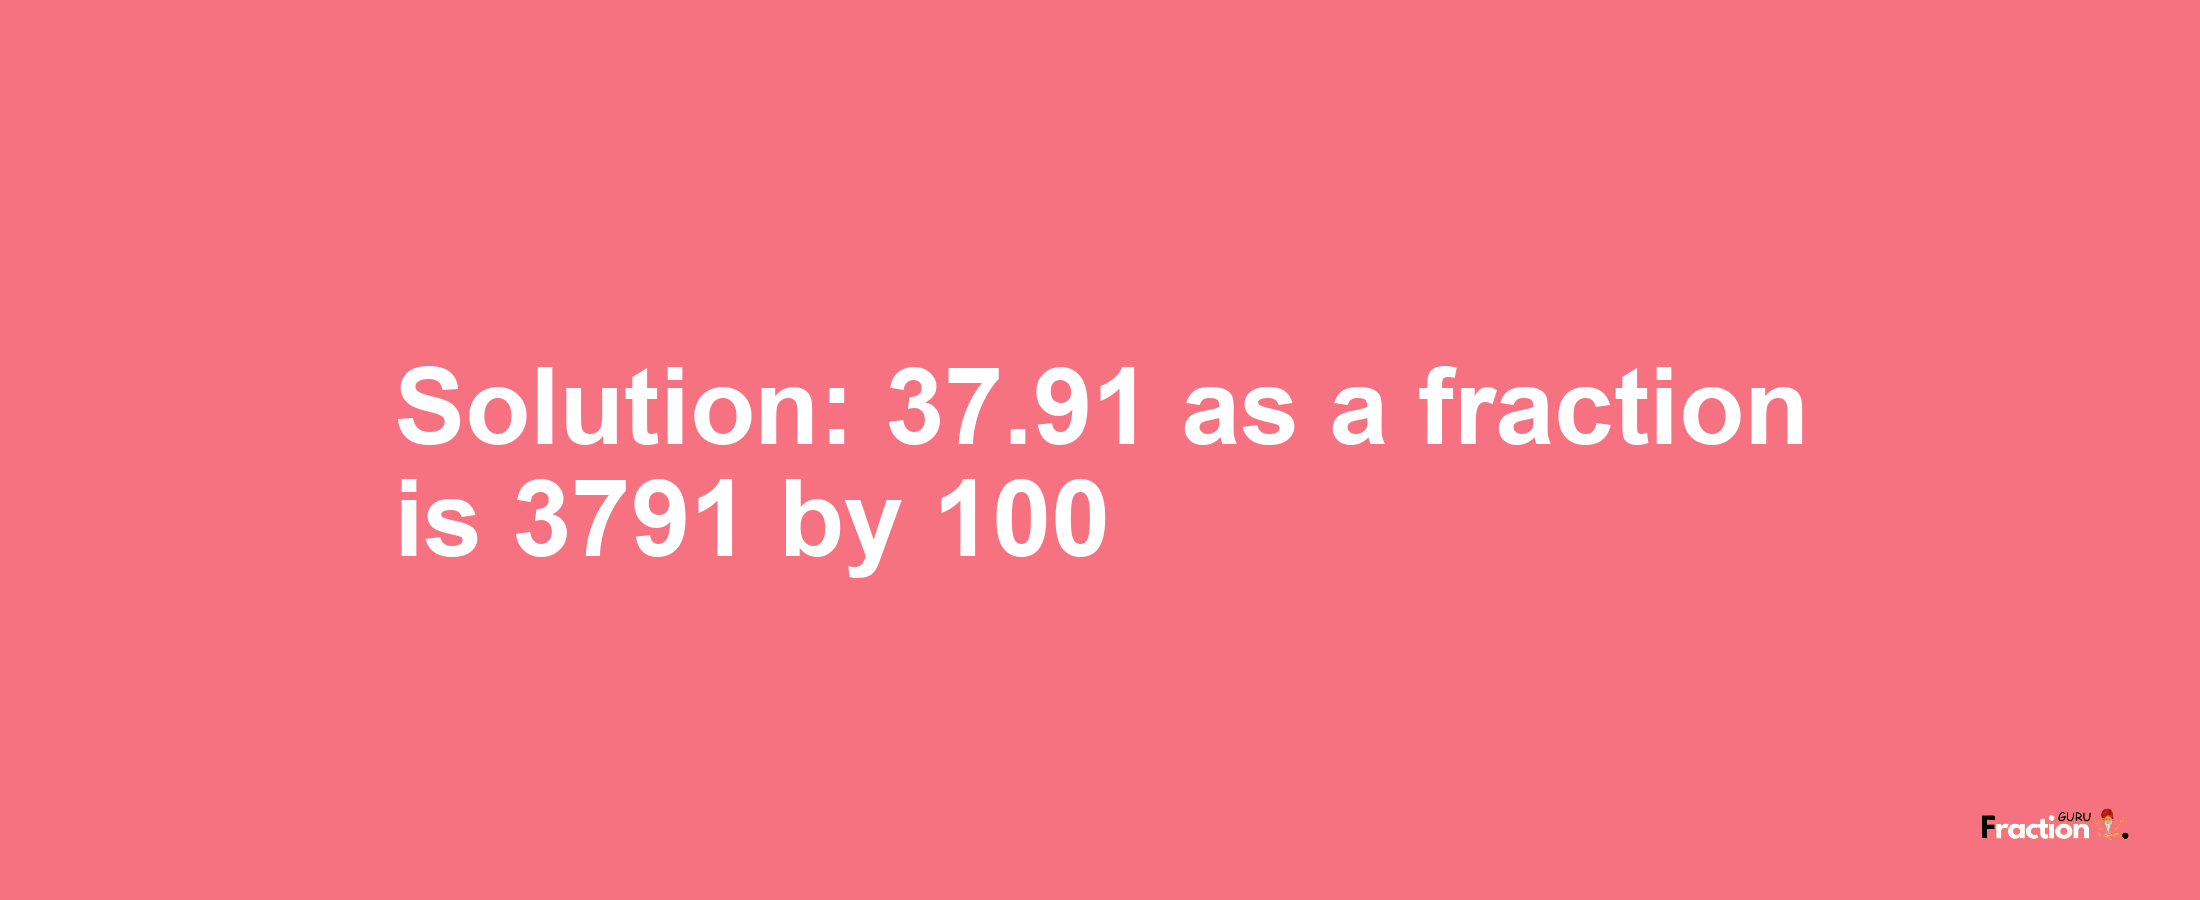 Solution:37.91 as a fraction is 3791/100